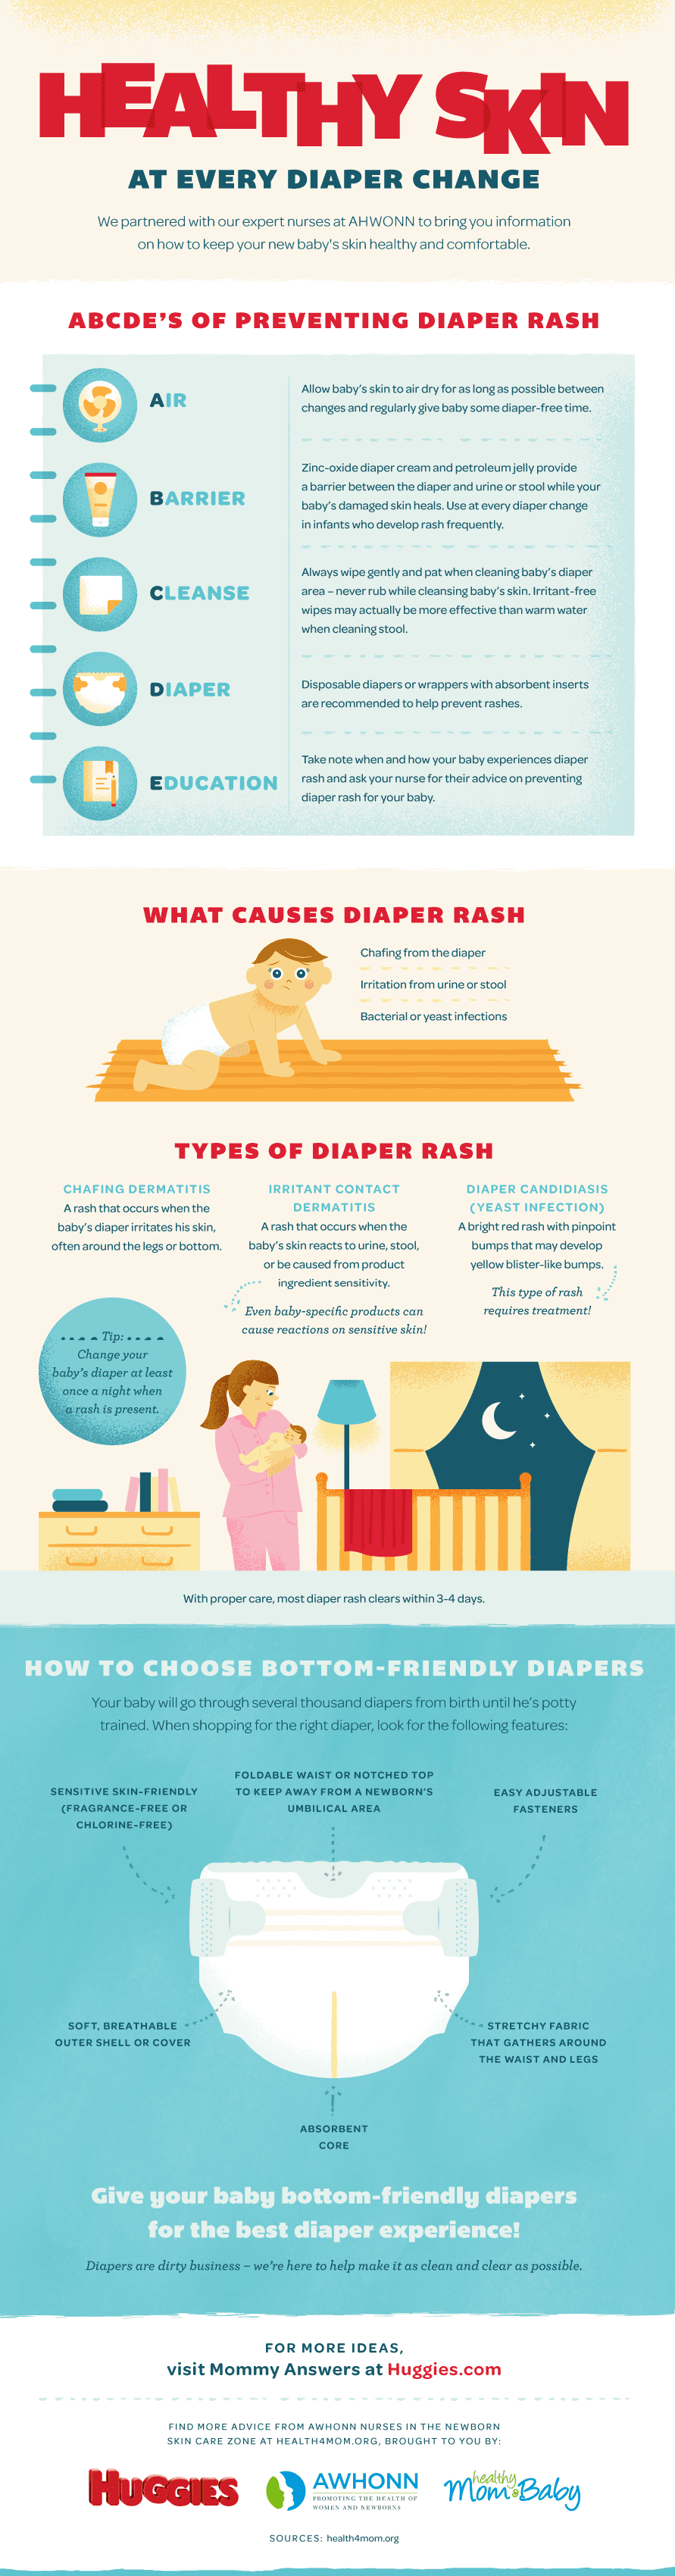 Healthy Skin at Every Diaper Change